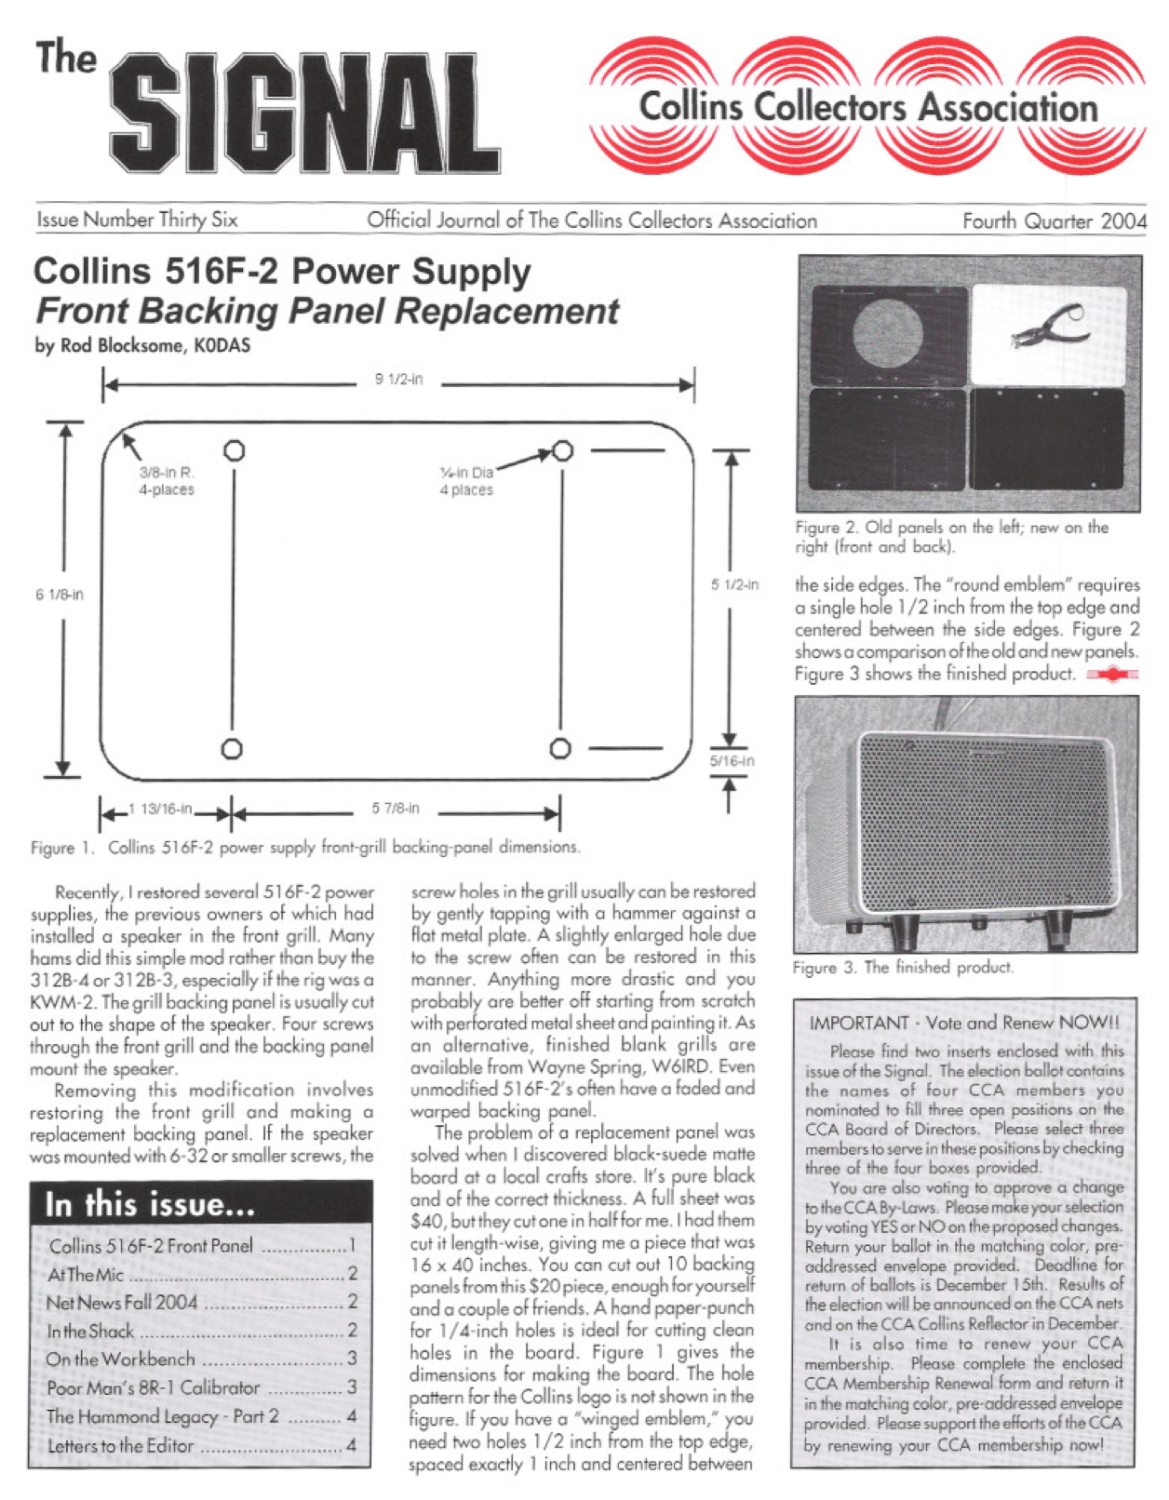 Collins 516F-2 AC Power Supply - Front Panel Backing Replacement (The Signal Issue 36 2004)